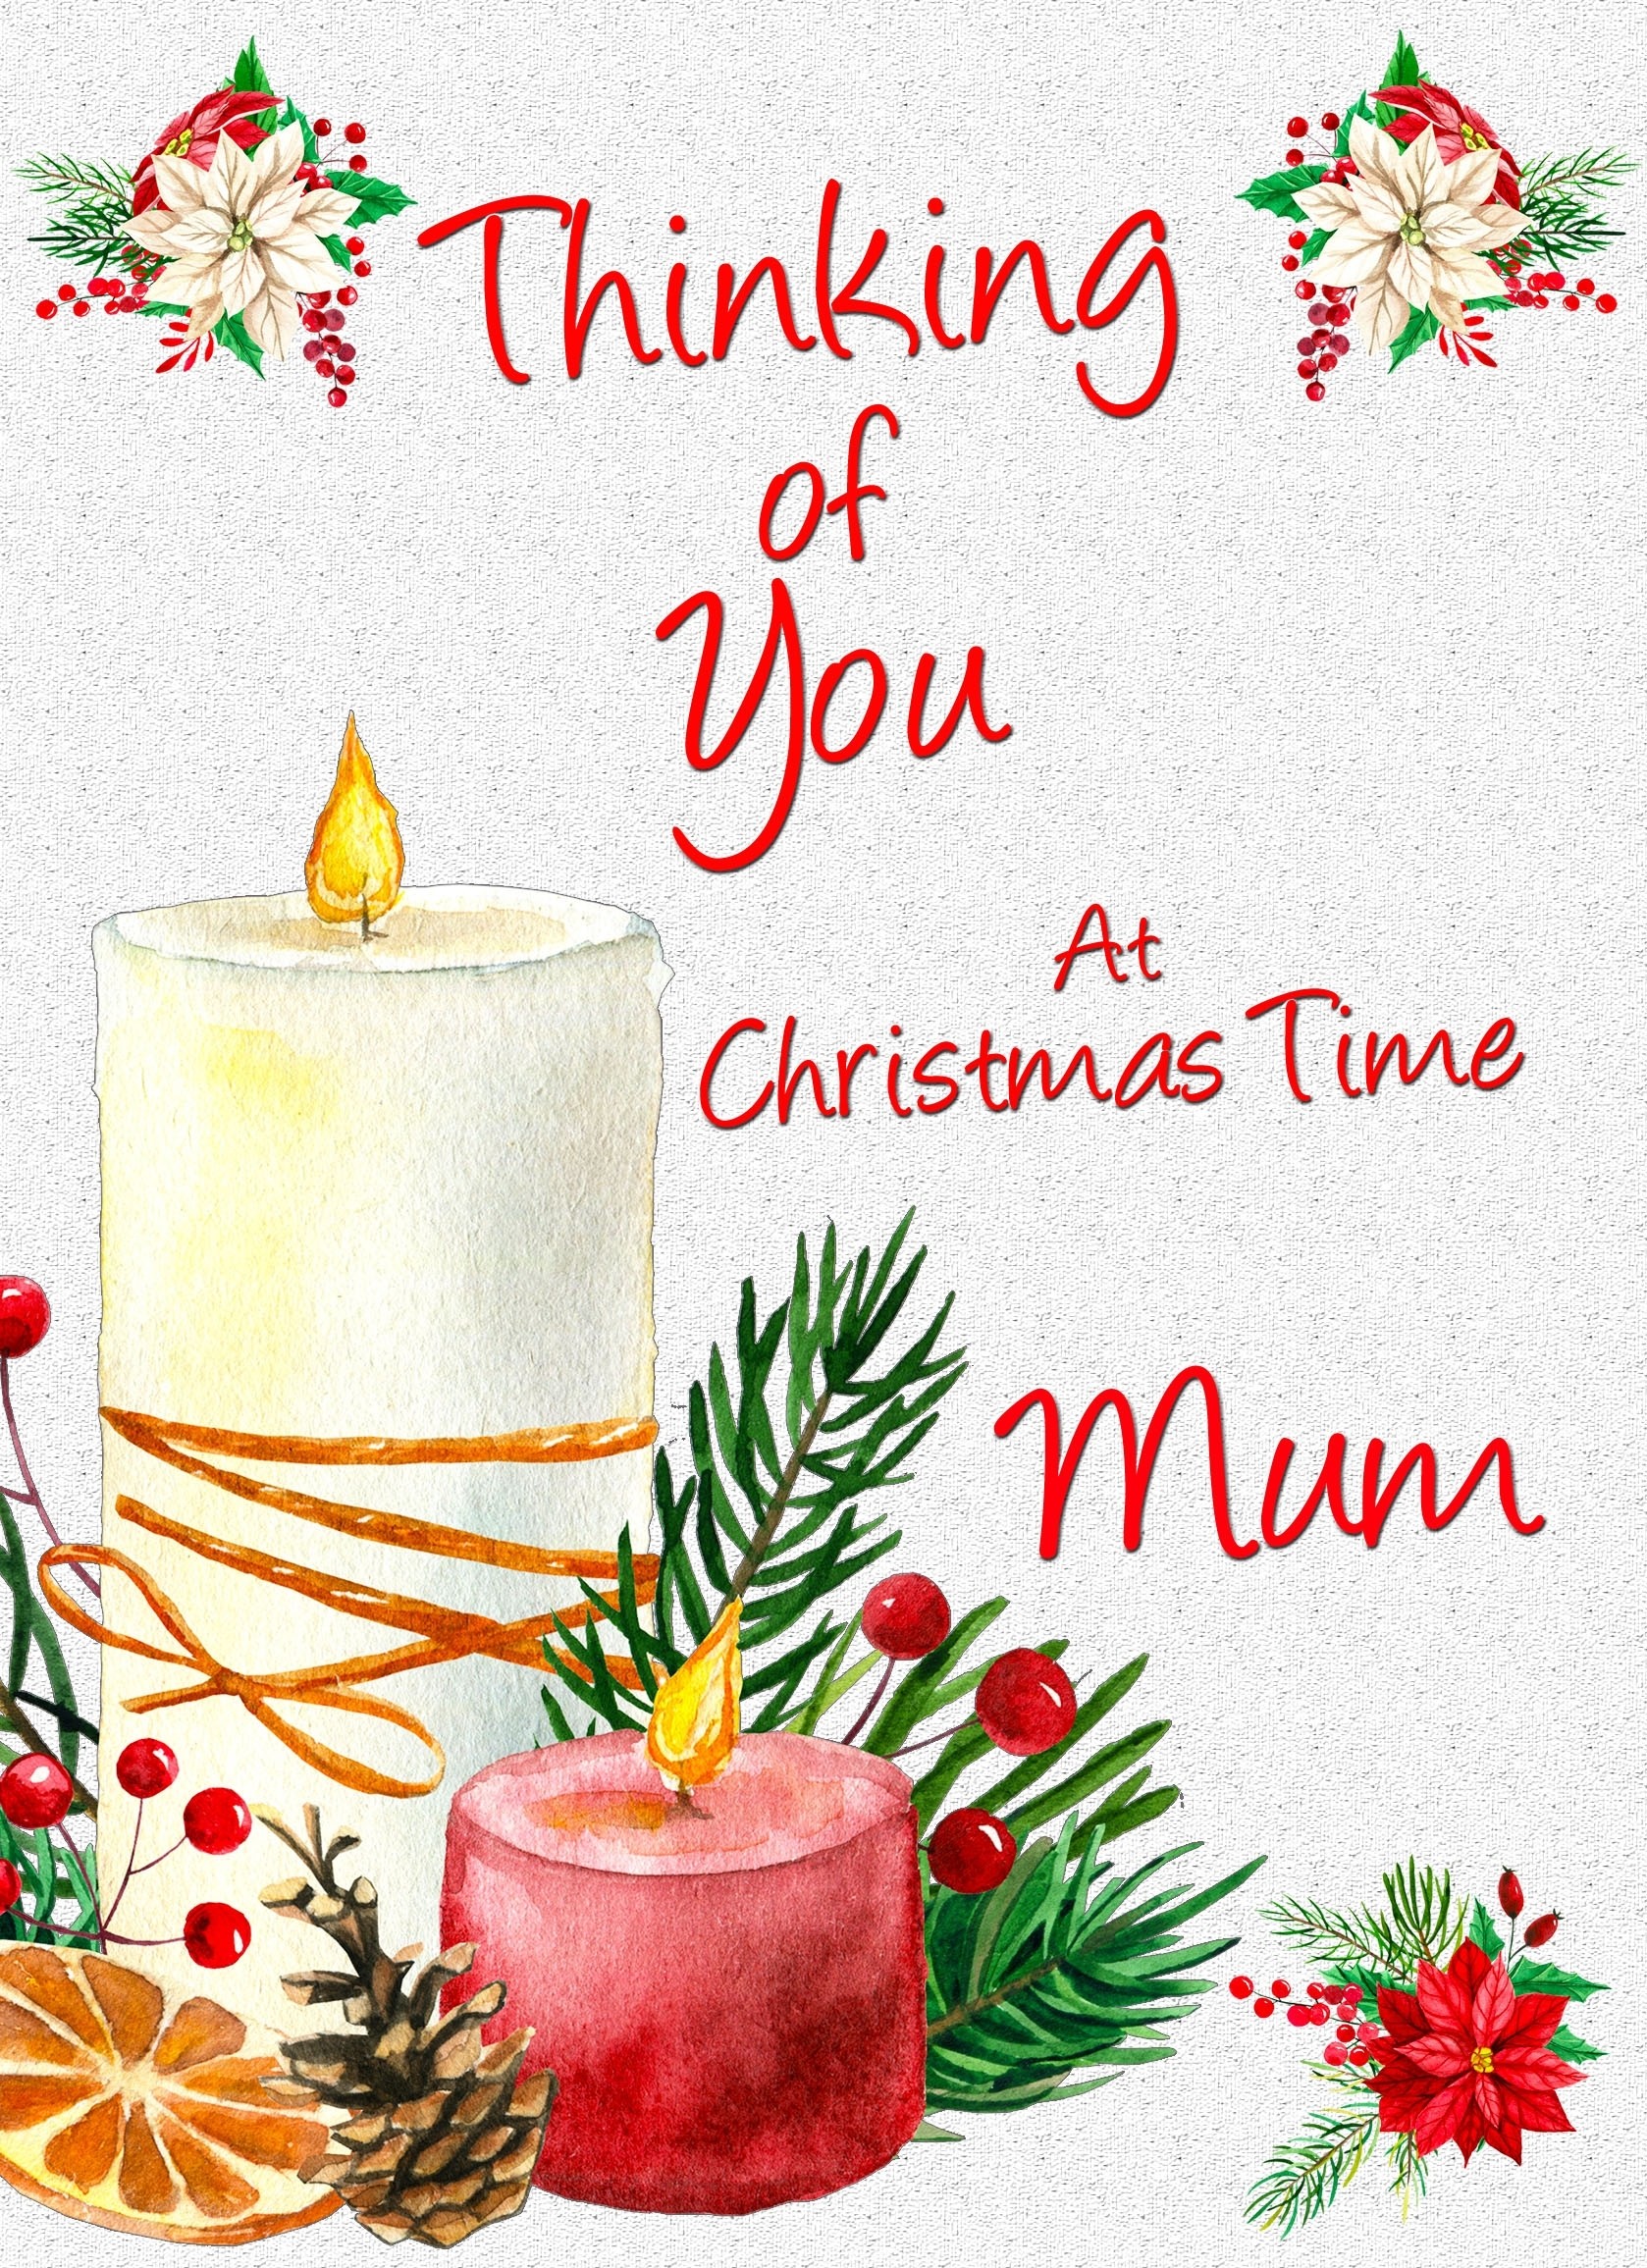 Thinking of You at Christmas Card For Mum (Candle)